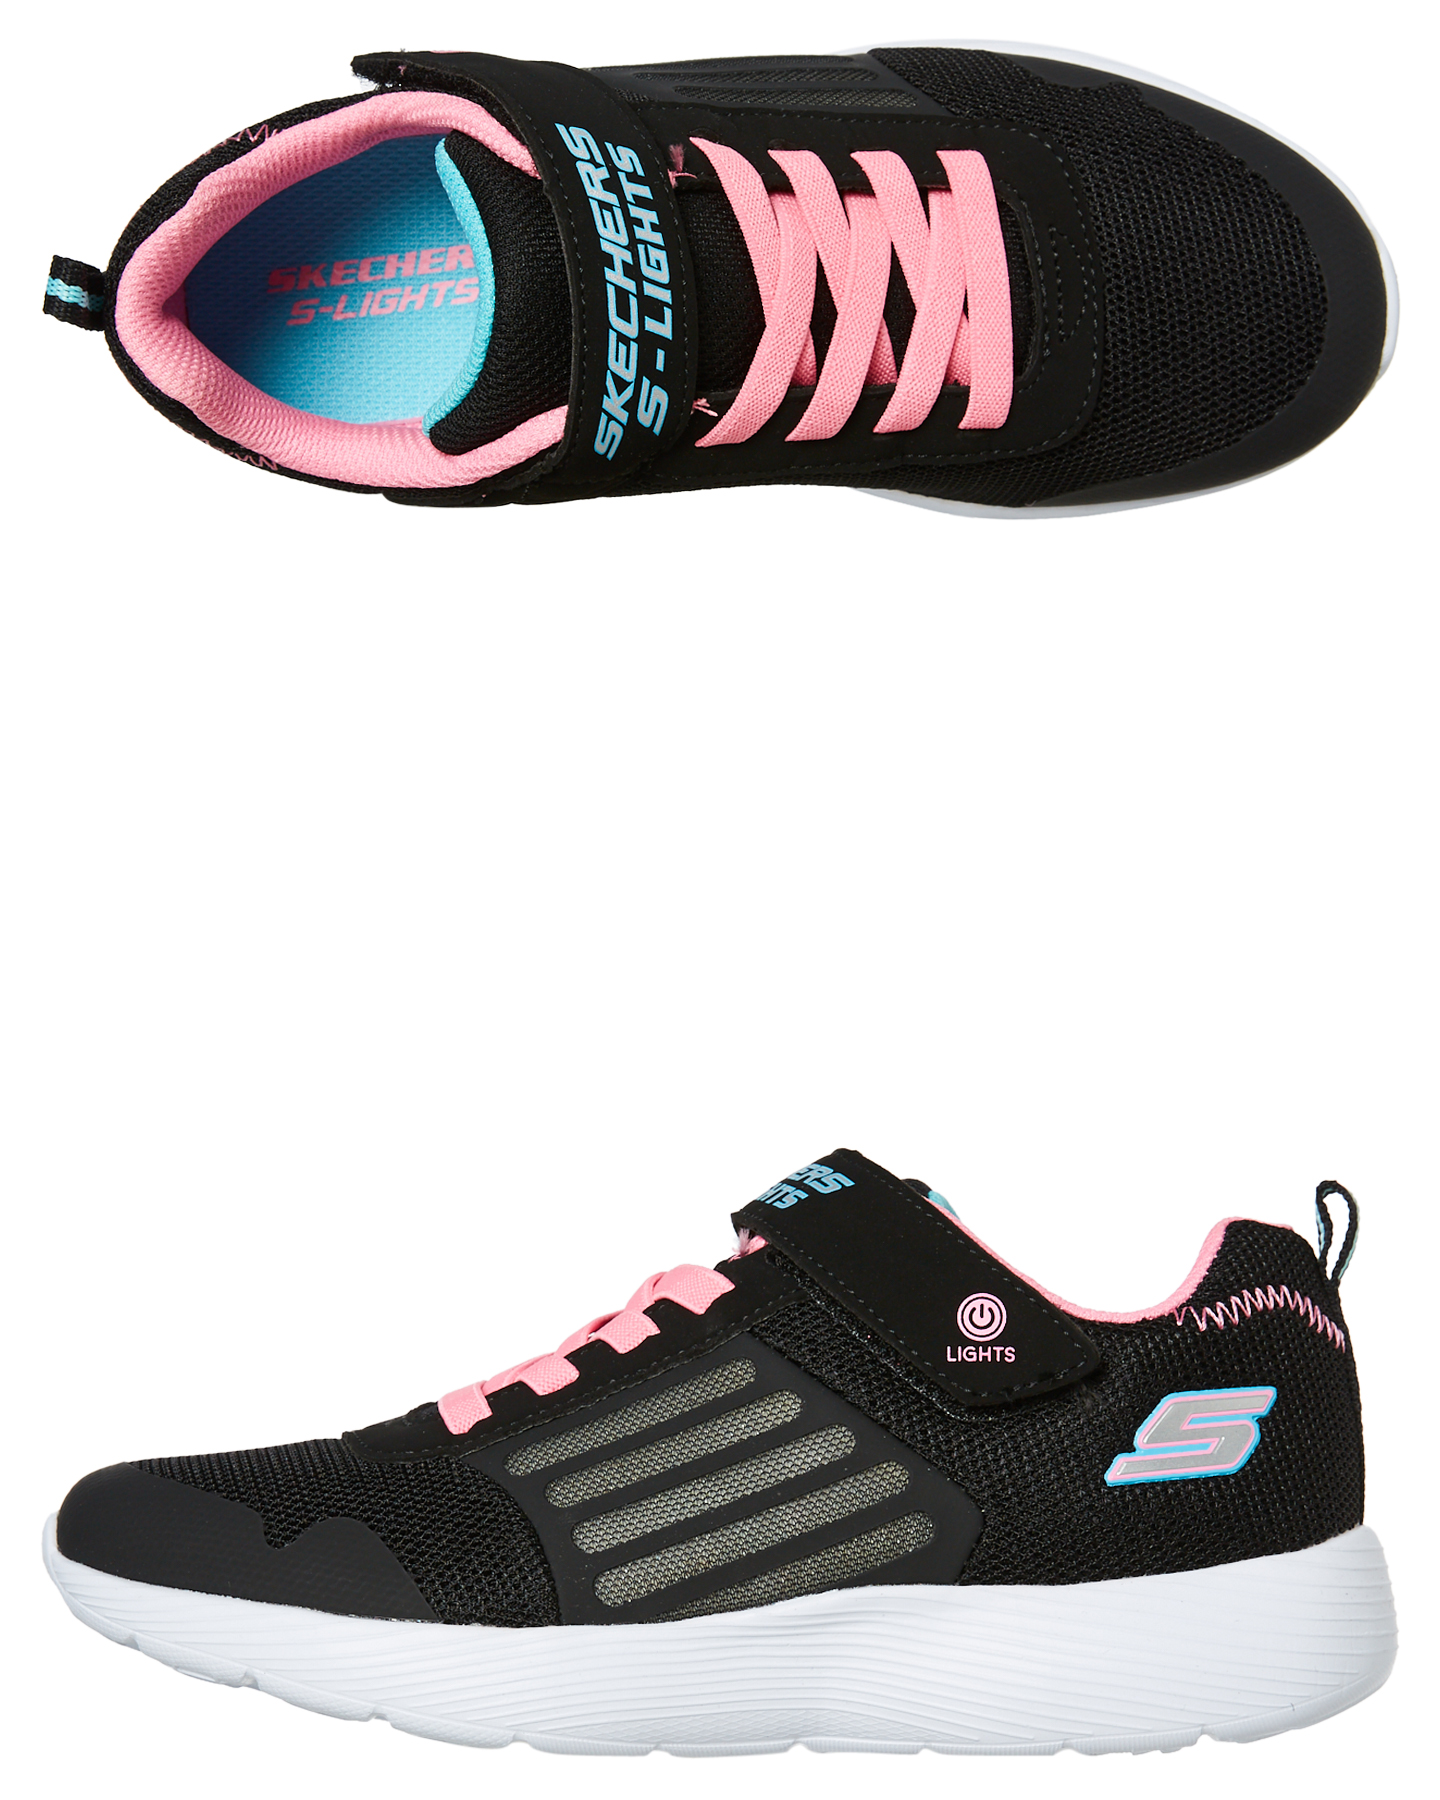 Skechers Girls Dyna Lights Shoes - Youth - Black Pink | SurfStitch